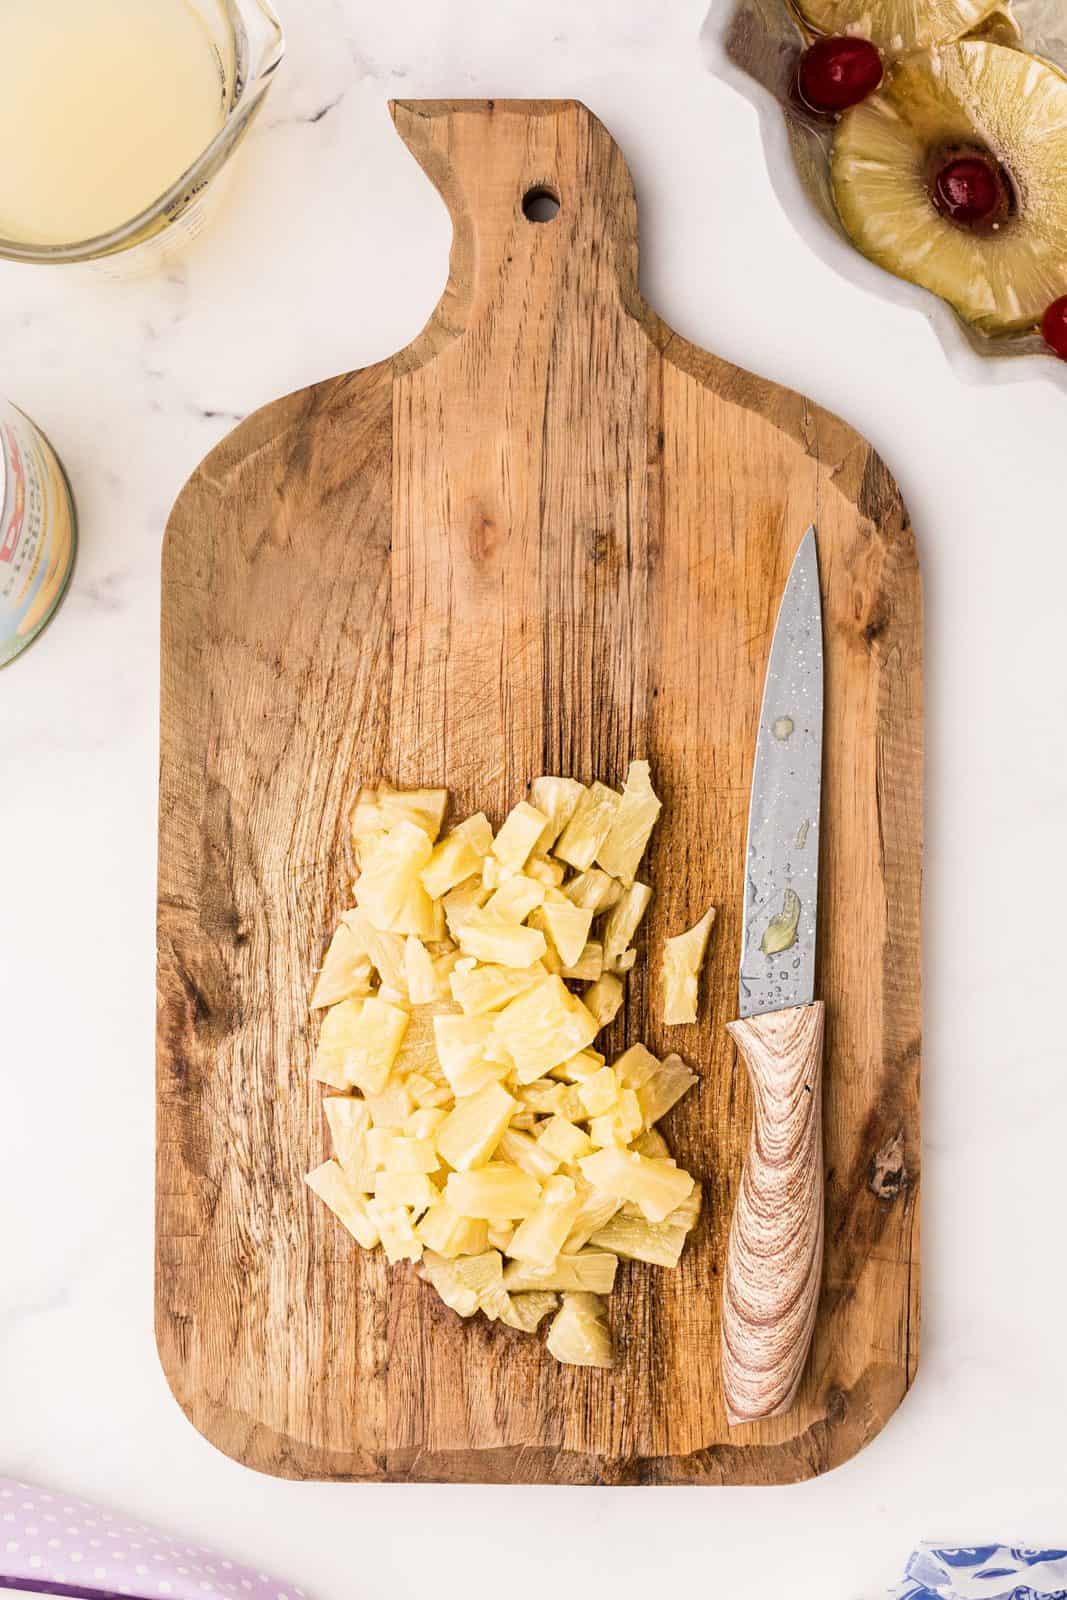 Chopped up pineapple rings on wooden cutting board.